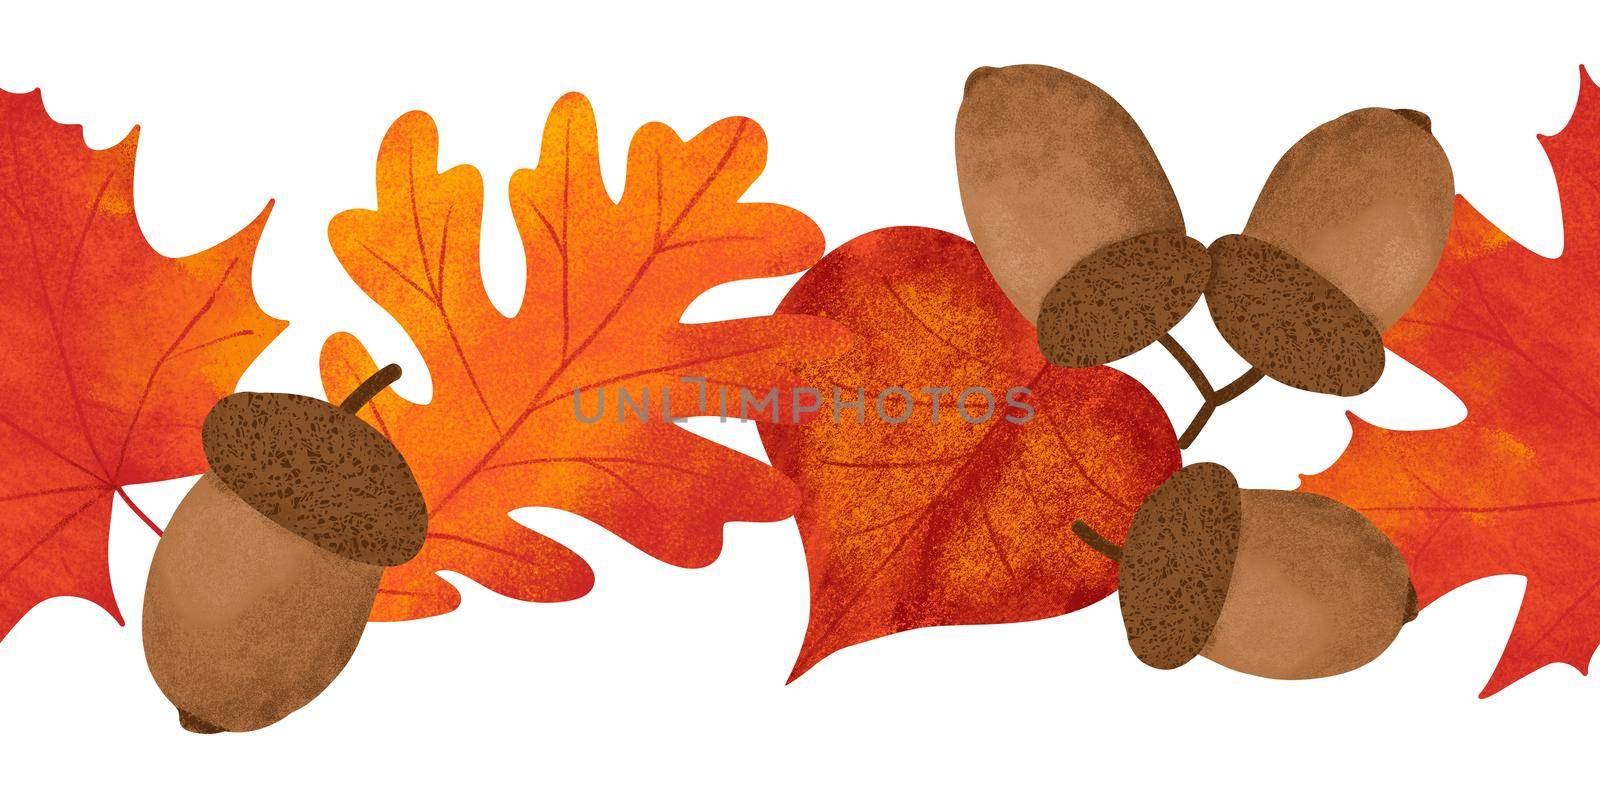 Hand drawn fall autumn seamless horizntal border with acorn forest wood grass leaves. Woodland frame in red orange yellow. Decorative ornament illustration